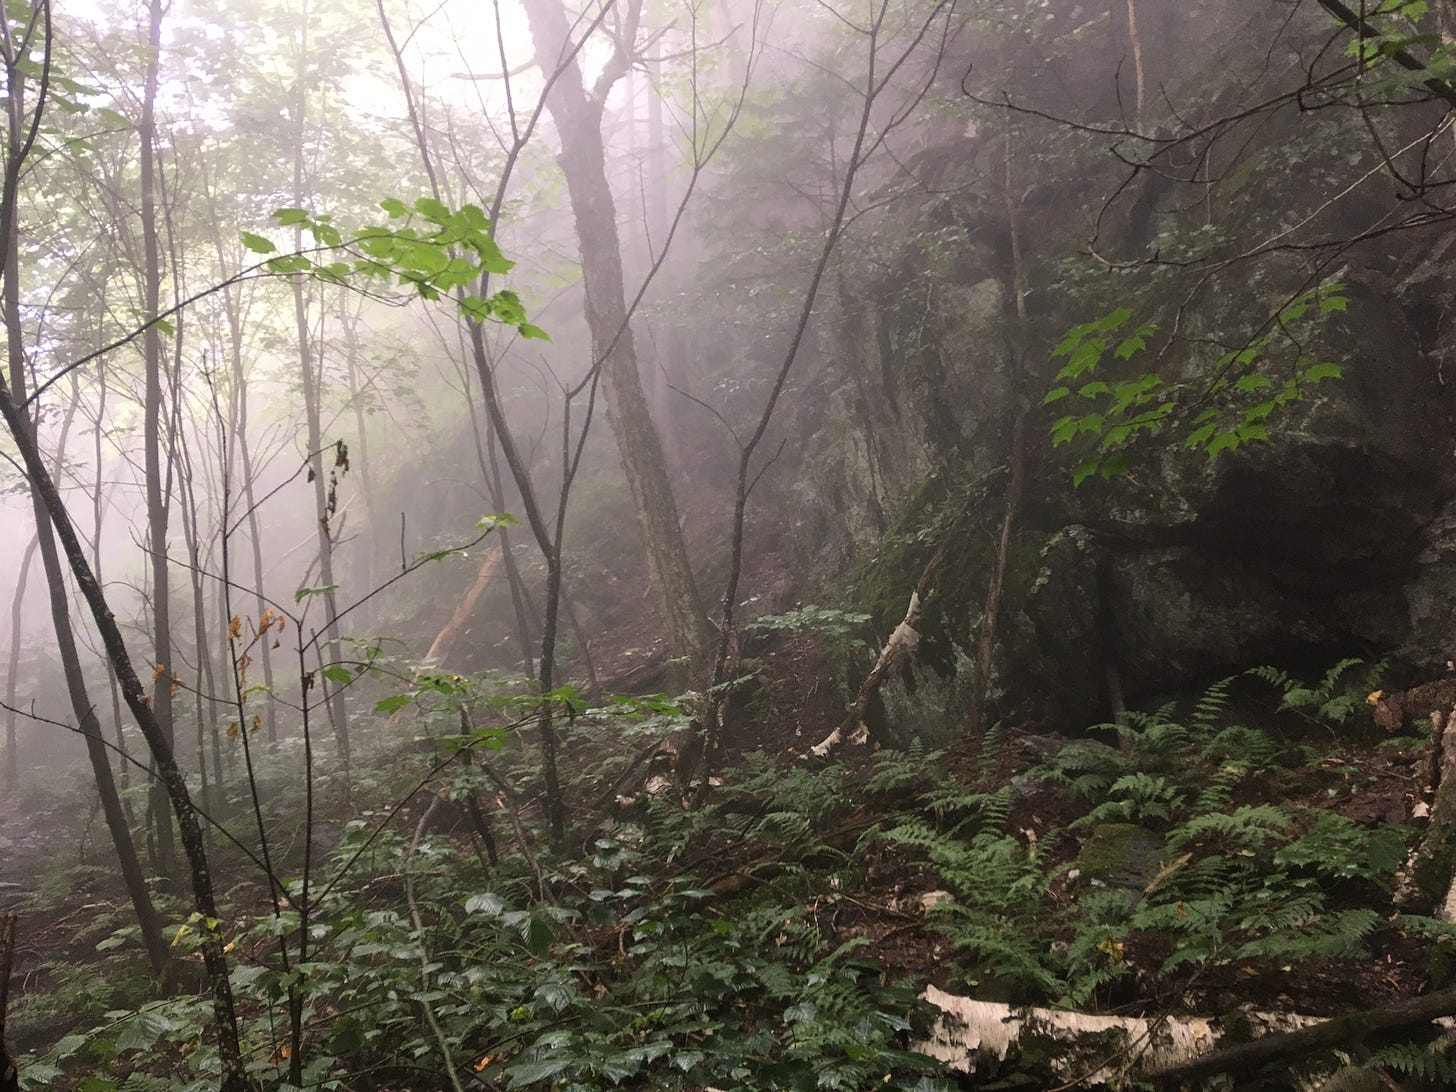 A forested slope with the background fading into fog